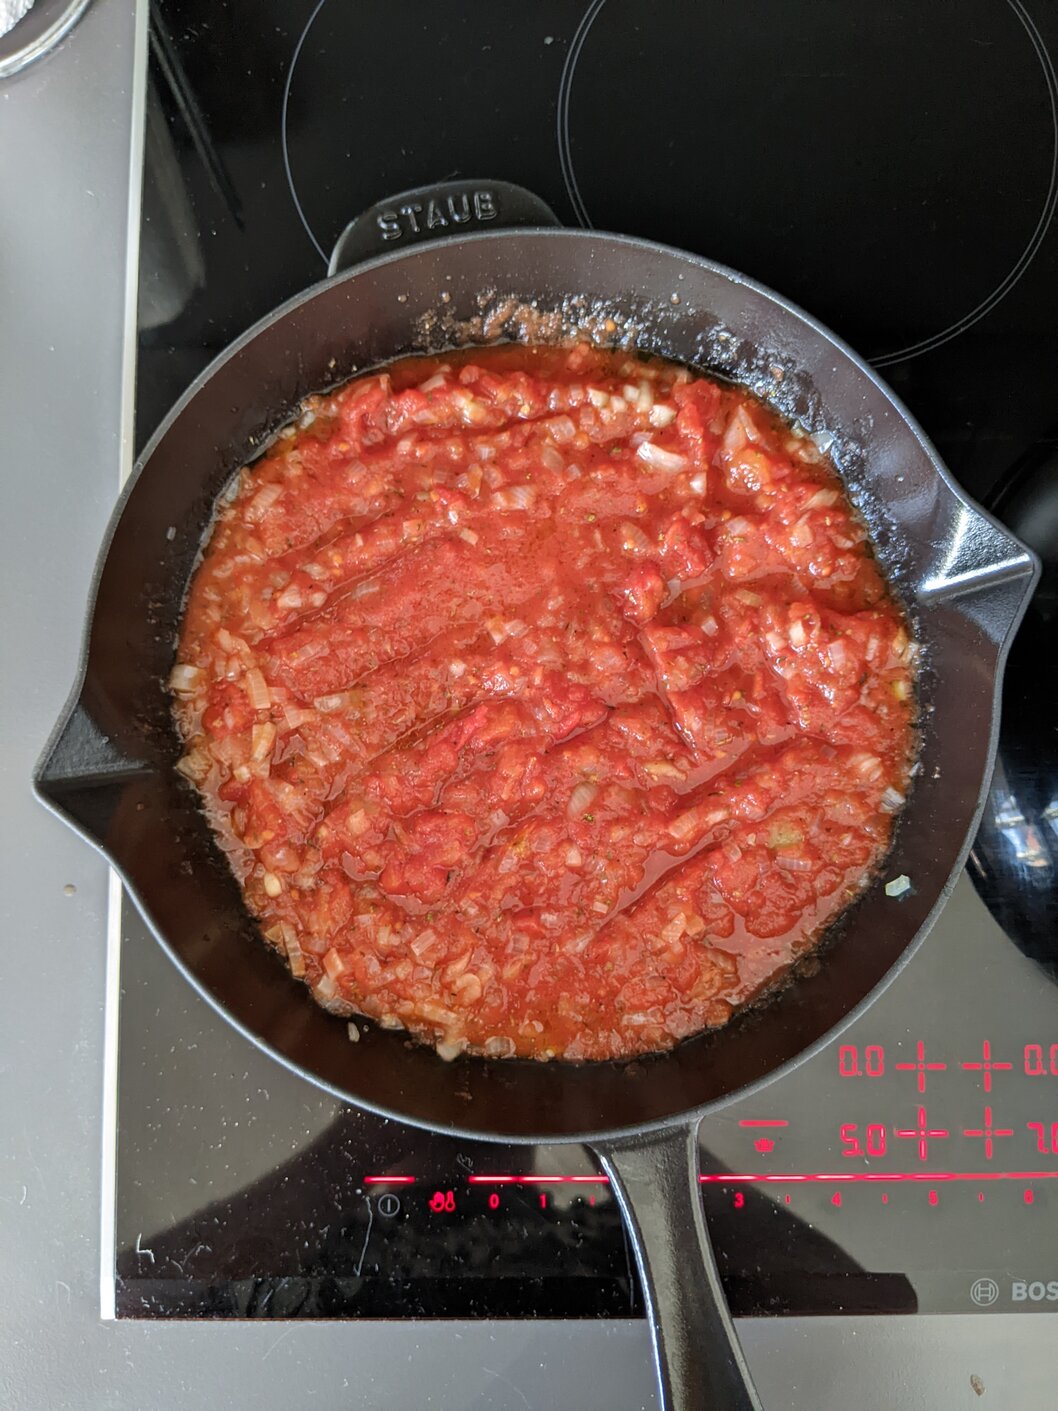 Chopped onion and tomatoes in a pan